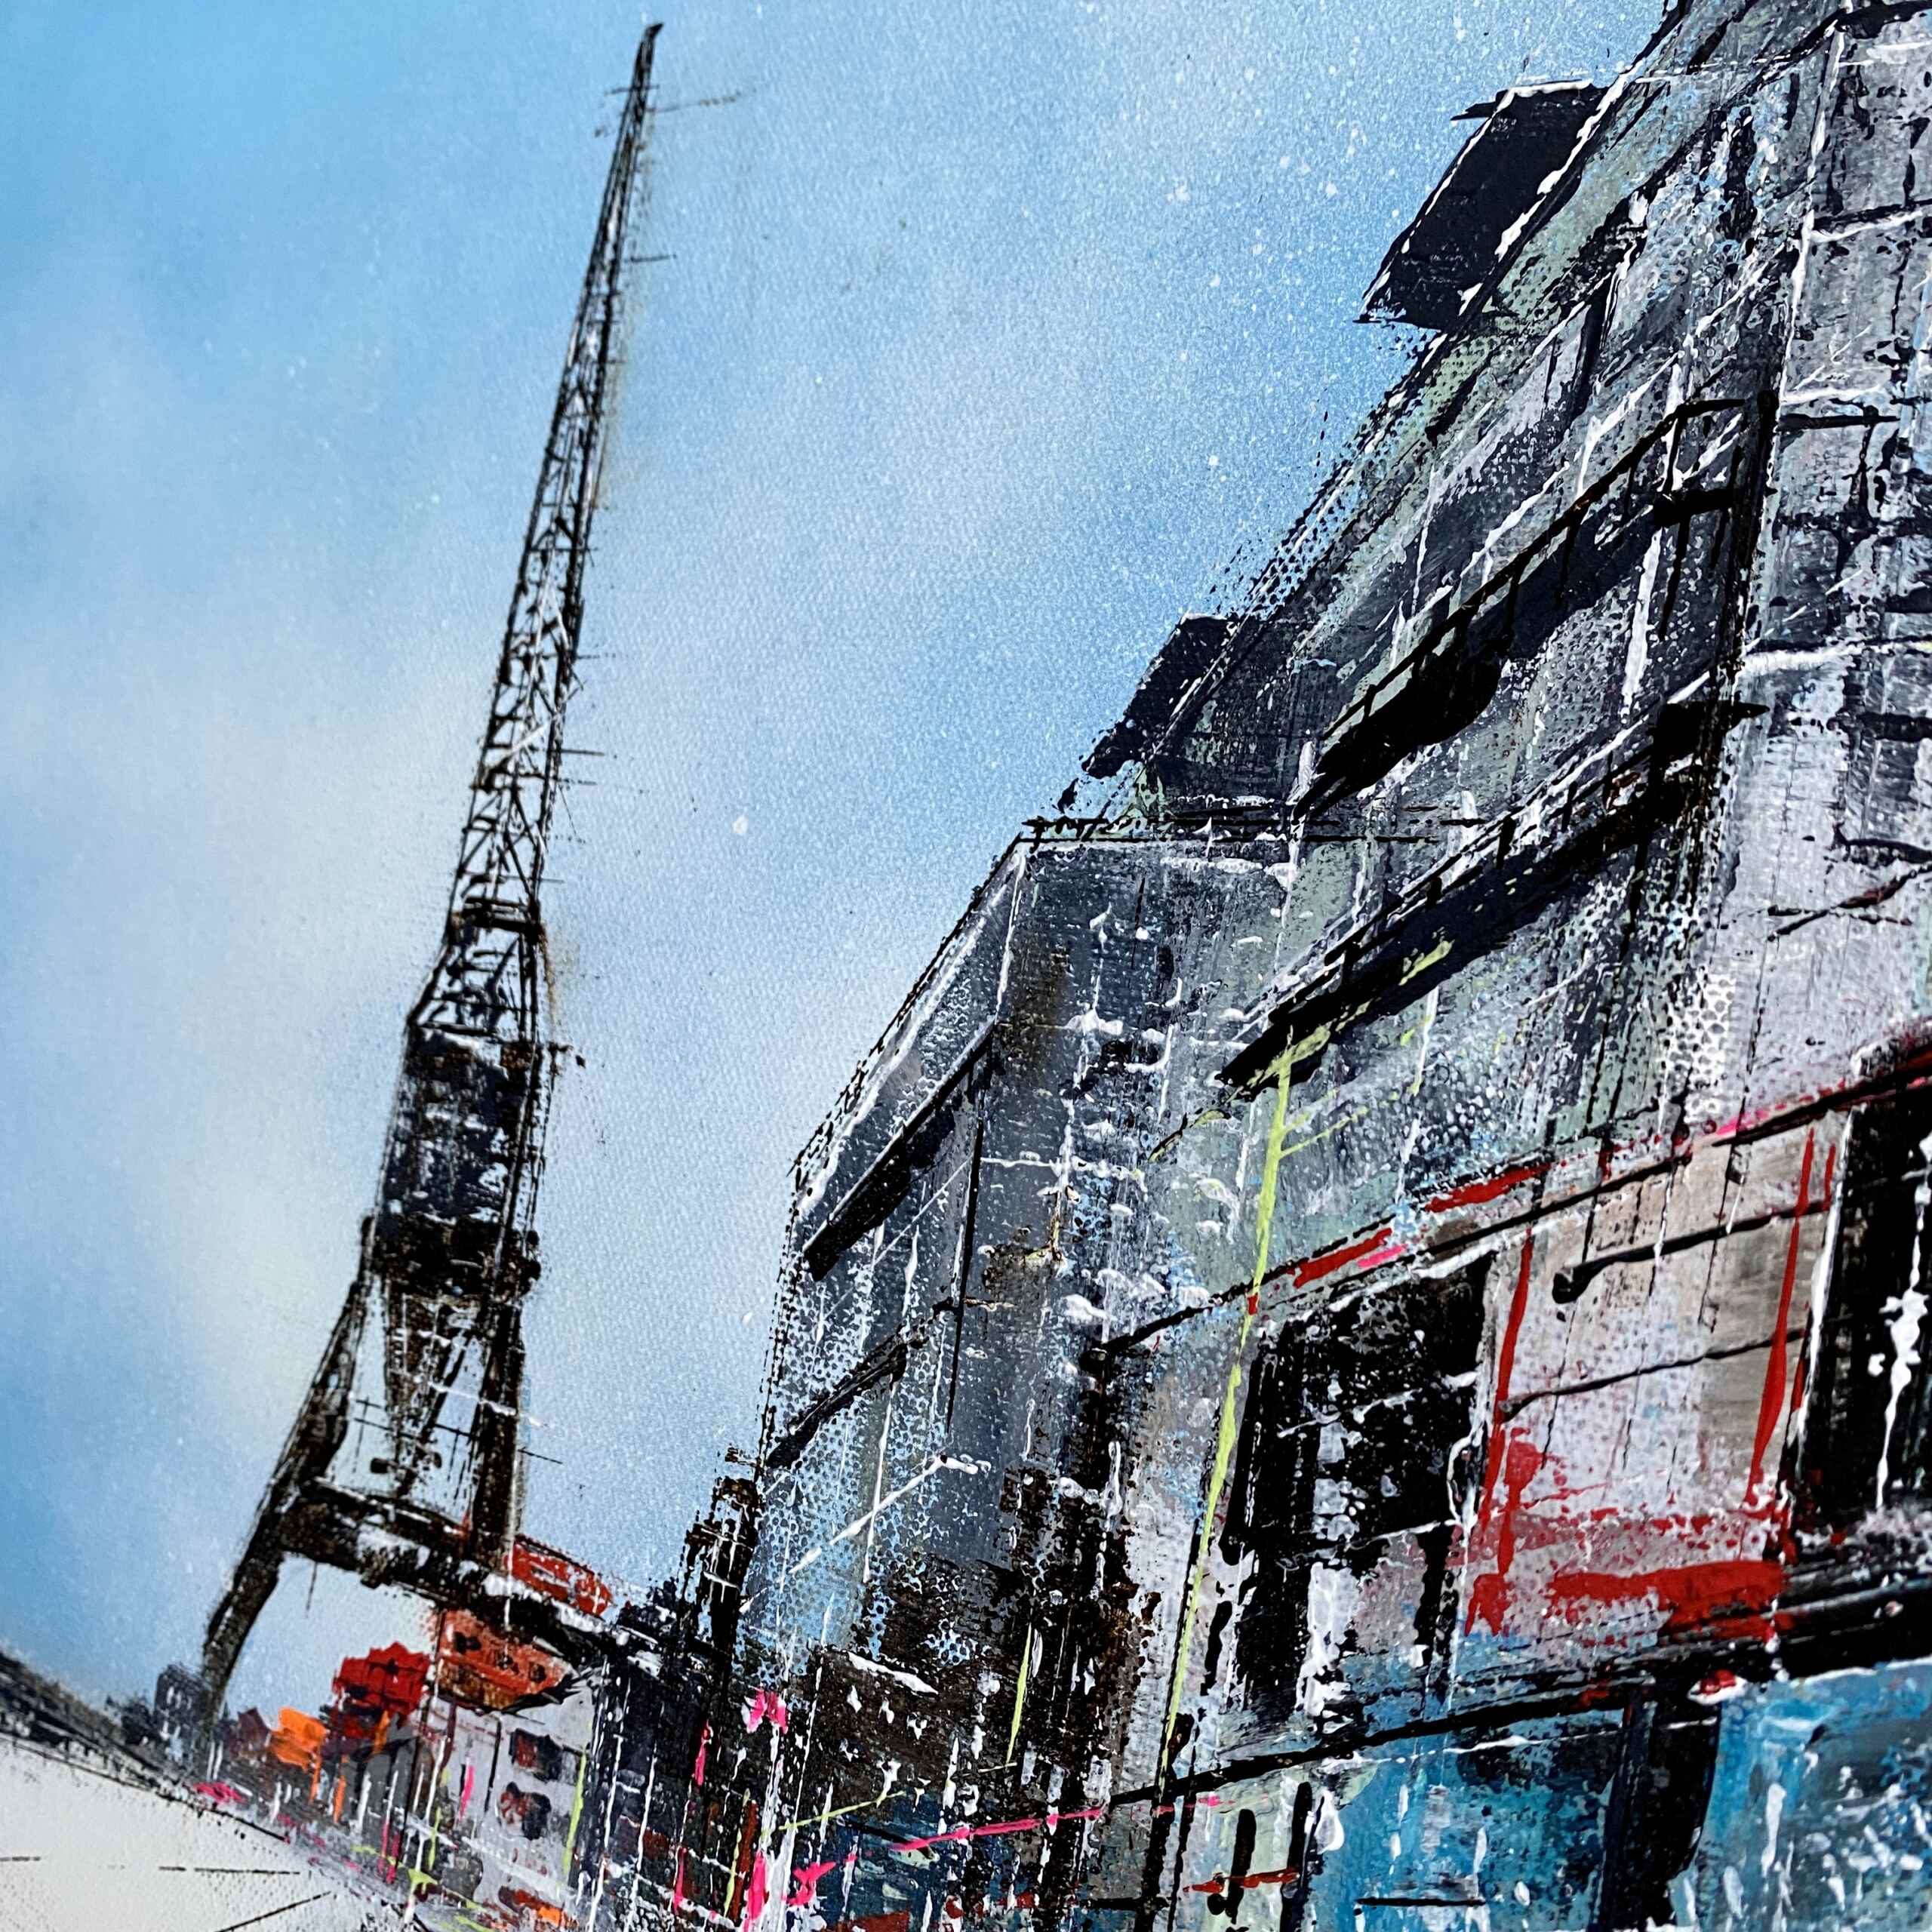 Detail of artwork "Dockland" by Nina Groth